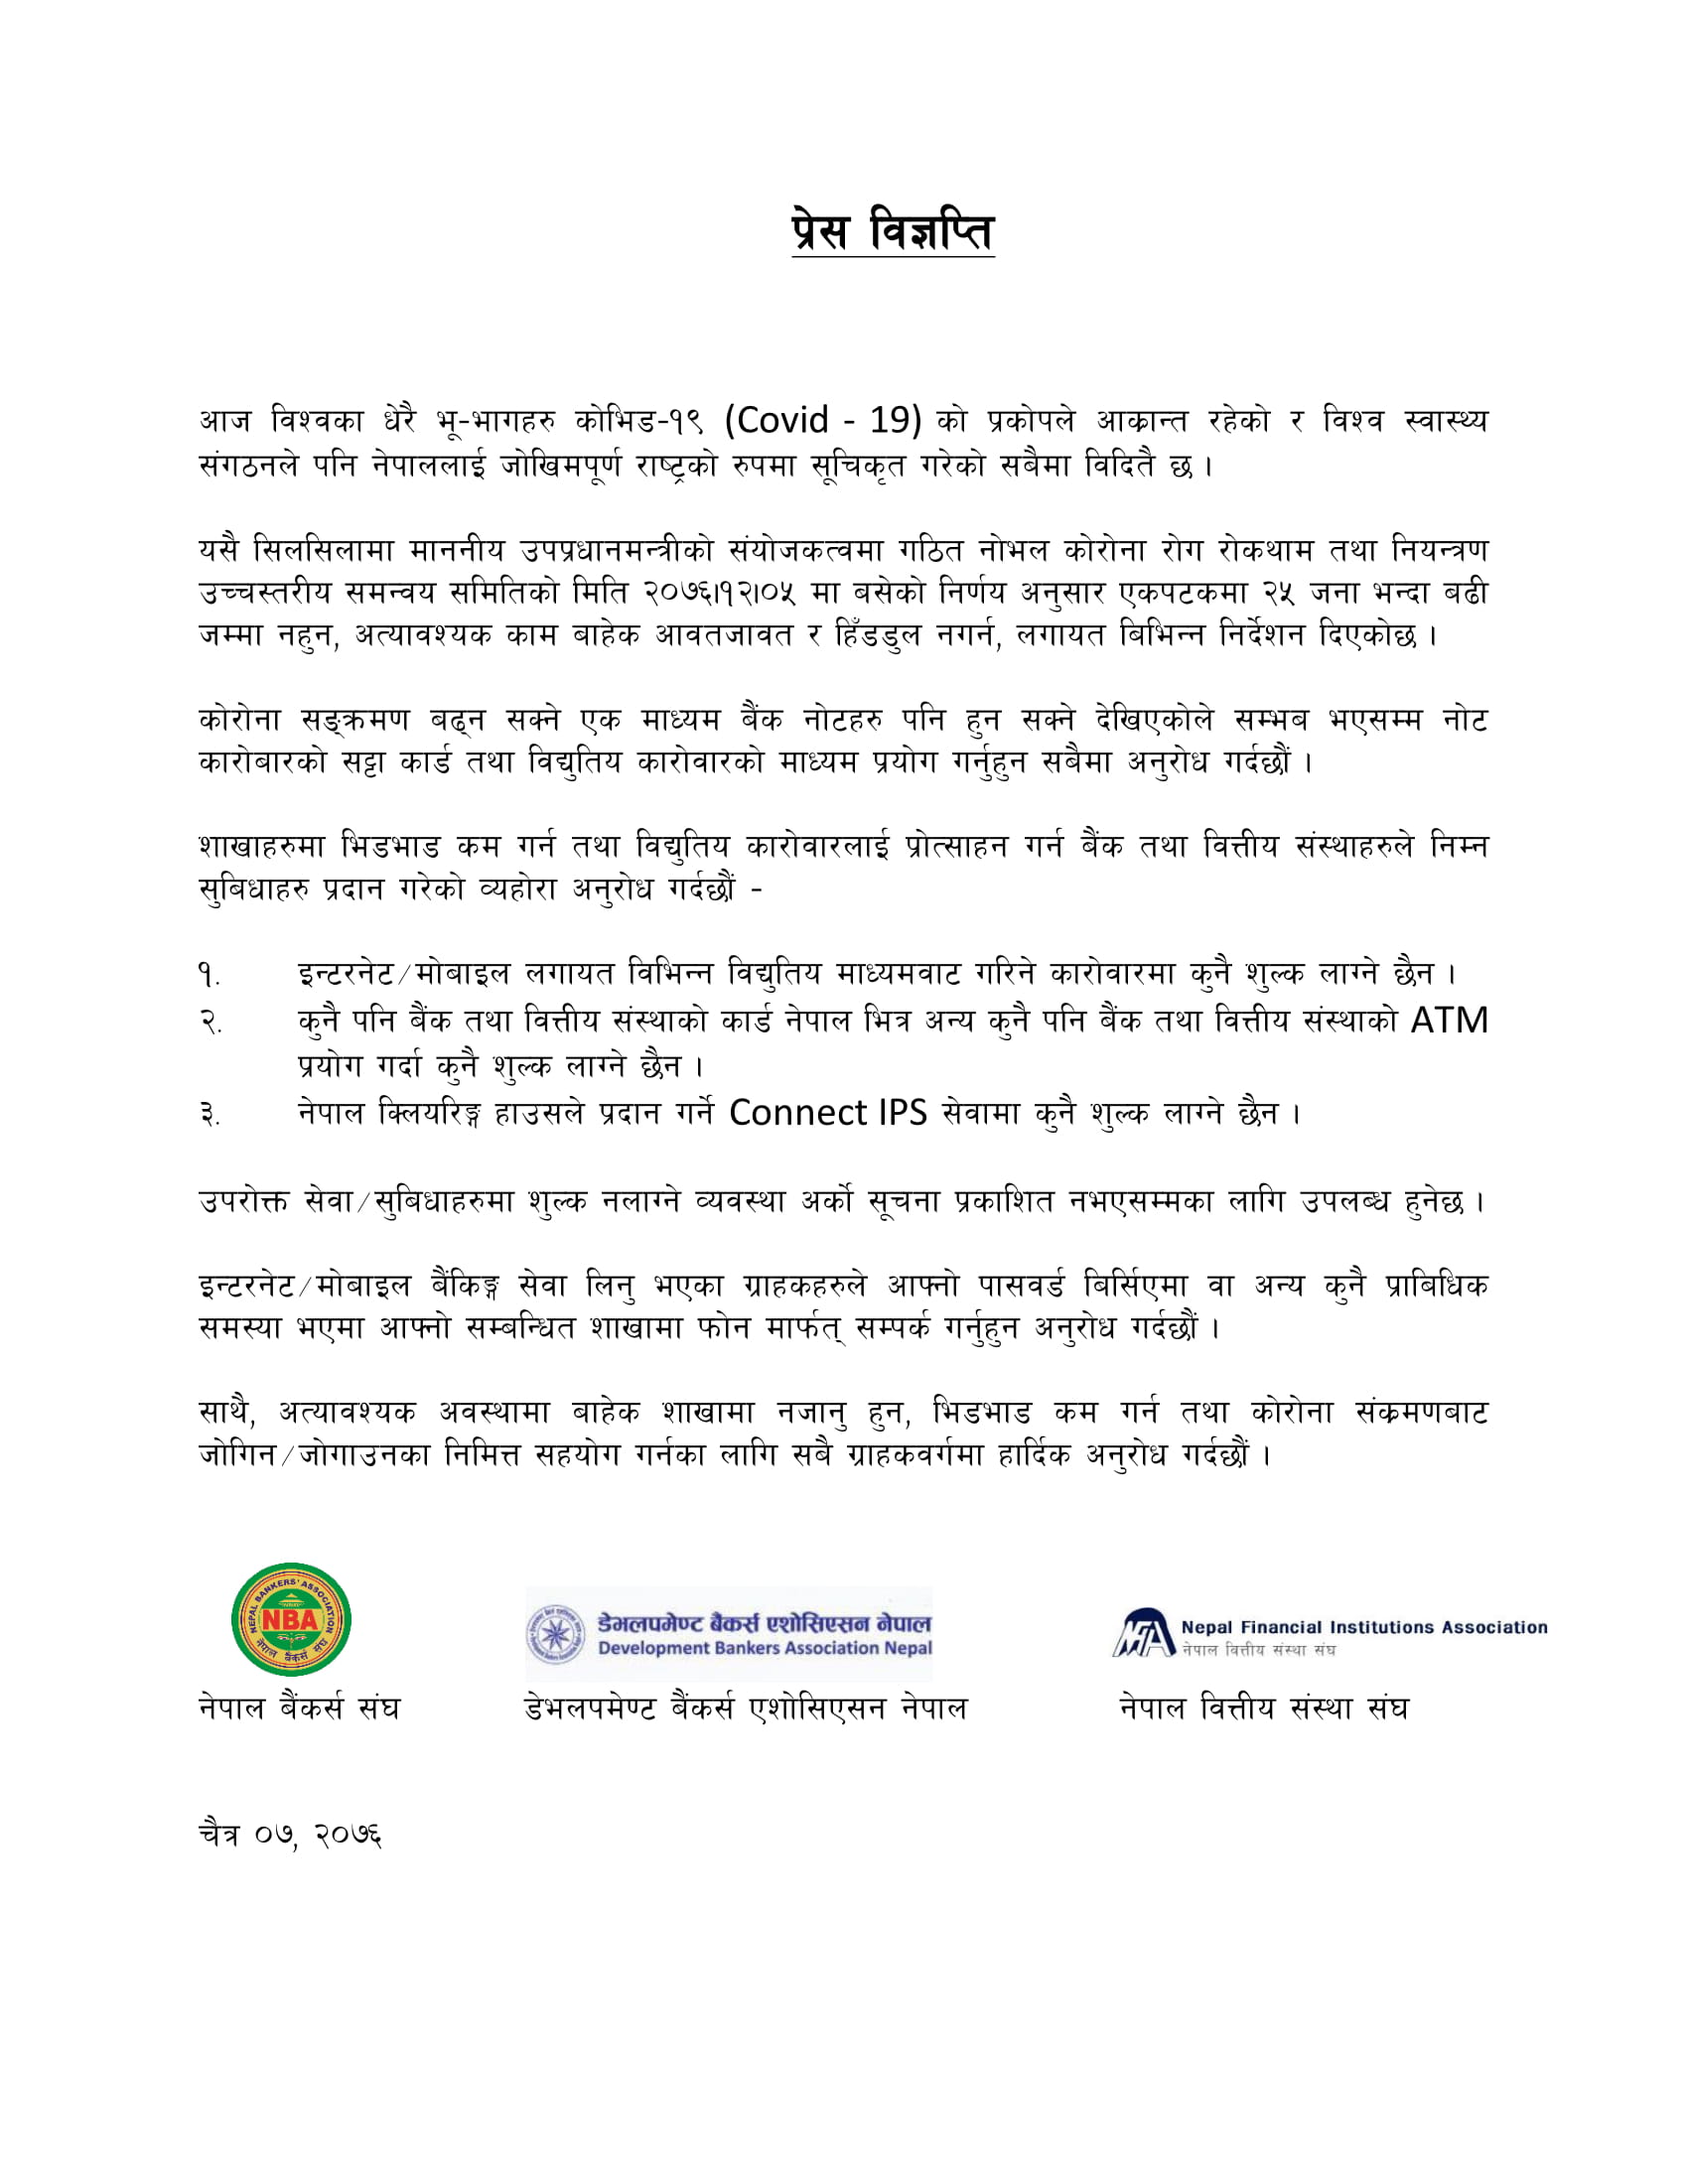 Press Release- Covid-2020-3-20- Nepal Bankers’ Association